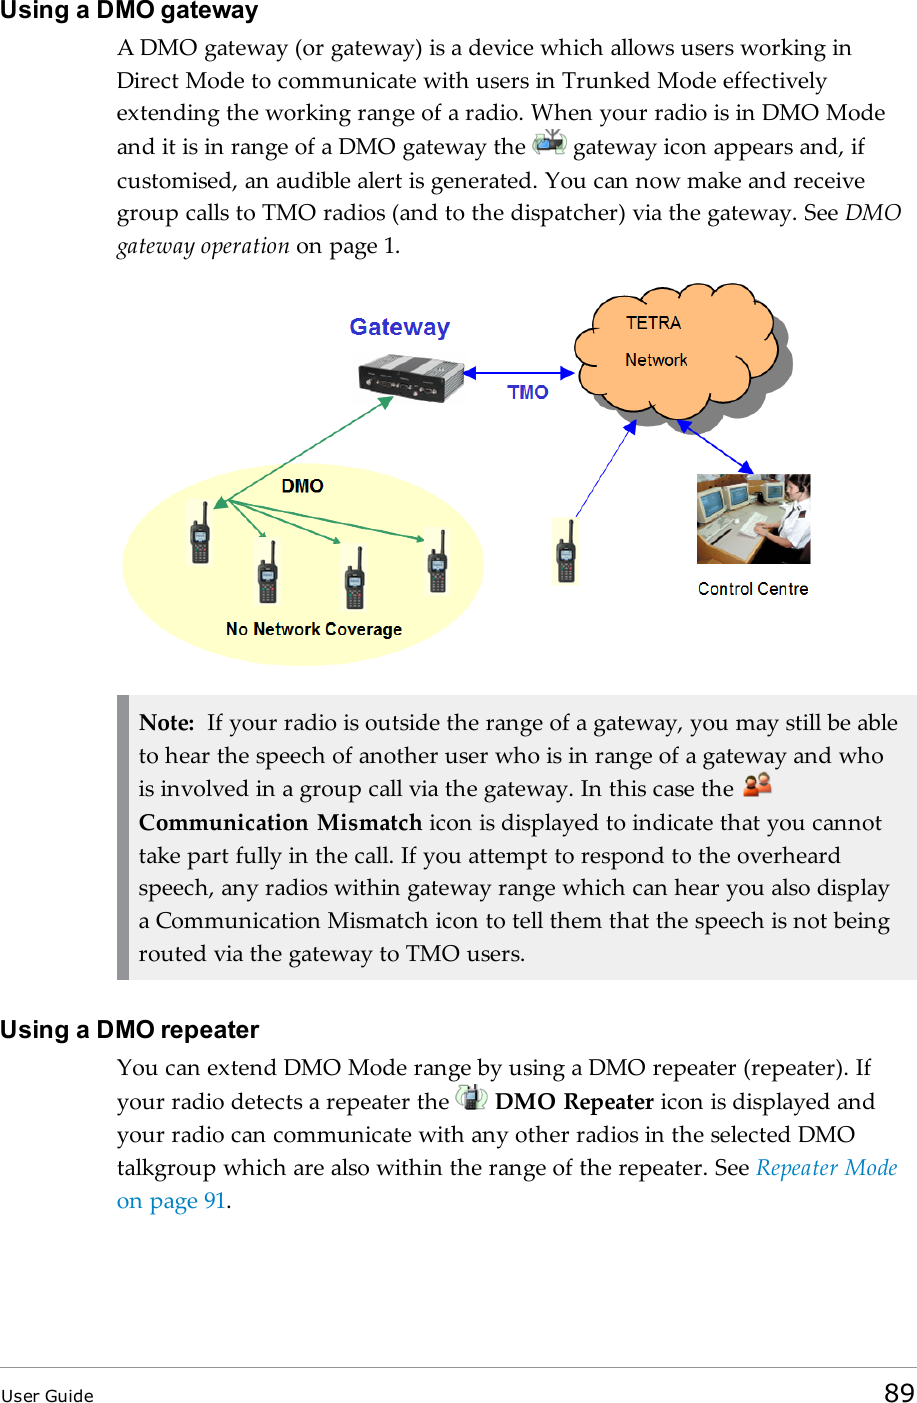 Using a DMO gatewayA DMO gateway (or gateway) is a device which allows users working inDirect Mode to communicate with users in Trunked Mode effectivelyextending the working range of a radio. When your radio is in DMO Modeand it is in range of a DMO gateway the gateway icon appears and, ifcustomised, an audible alert is generated. You can now make and receivegroup calls to TMO radios (and to the dispatcher) via the gateway. See DMOgateway operation on page 1.Note: If your radio is outside the range of a gateway, you may still be ableto hear the speech of another user who is in range of a gateway and whois involved in a group call via the gateway. In this case theCommunication Mismatch icon is displayed to indicate that you cannottake part fully in the call. If you attempt to respond to the overheardspeech, any radios within gateway range which can hear you also displaya Communication Mismatch icon to tell them that the speech is not beingrouted via the gateway to TMO users.Using a DMO repeaterYou can extend DMO Mode range by using a DMO repeater (repeater). Ifyour radio detects a repeater the DMO Repeater icon is displayed andyour radio can communicate with any other radios in the selected DMOtalkgroup which are also within the range of the repeater. See Repeater Modeon page 91.User Guide 89